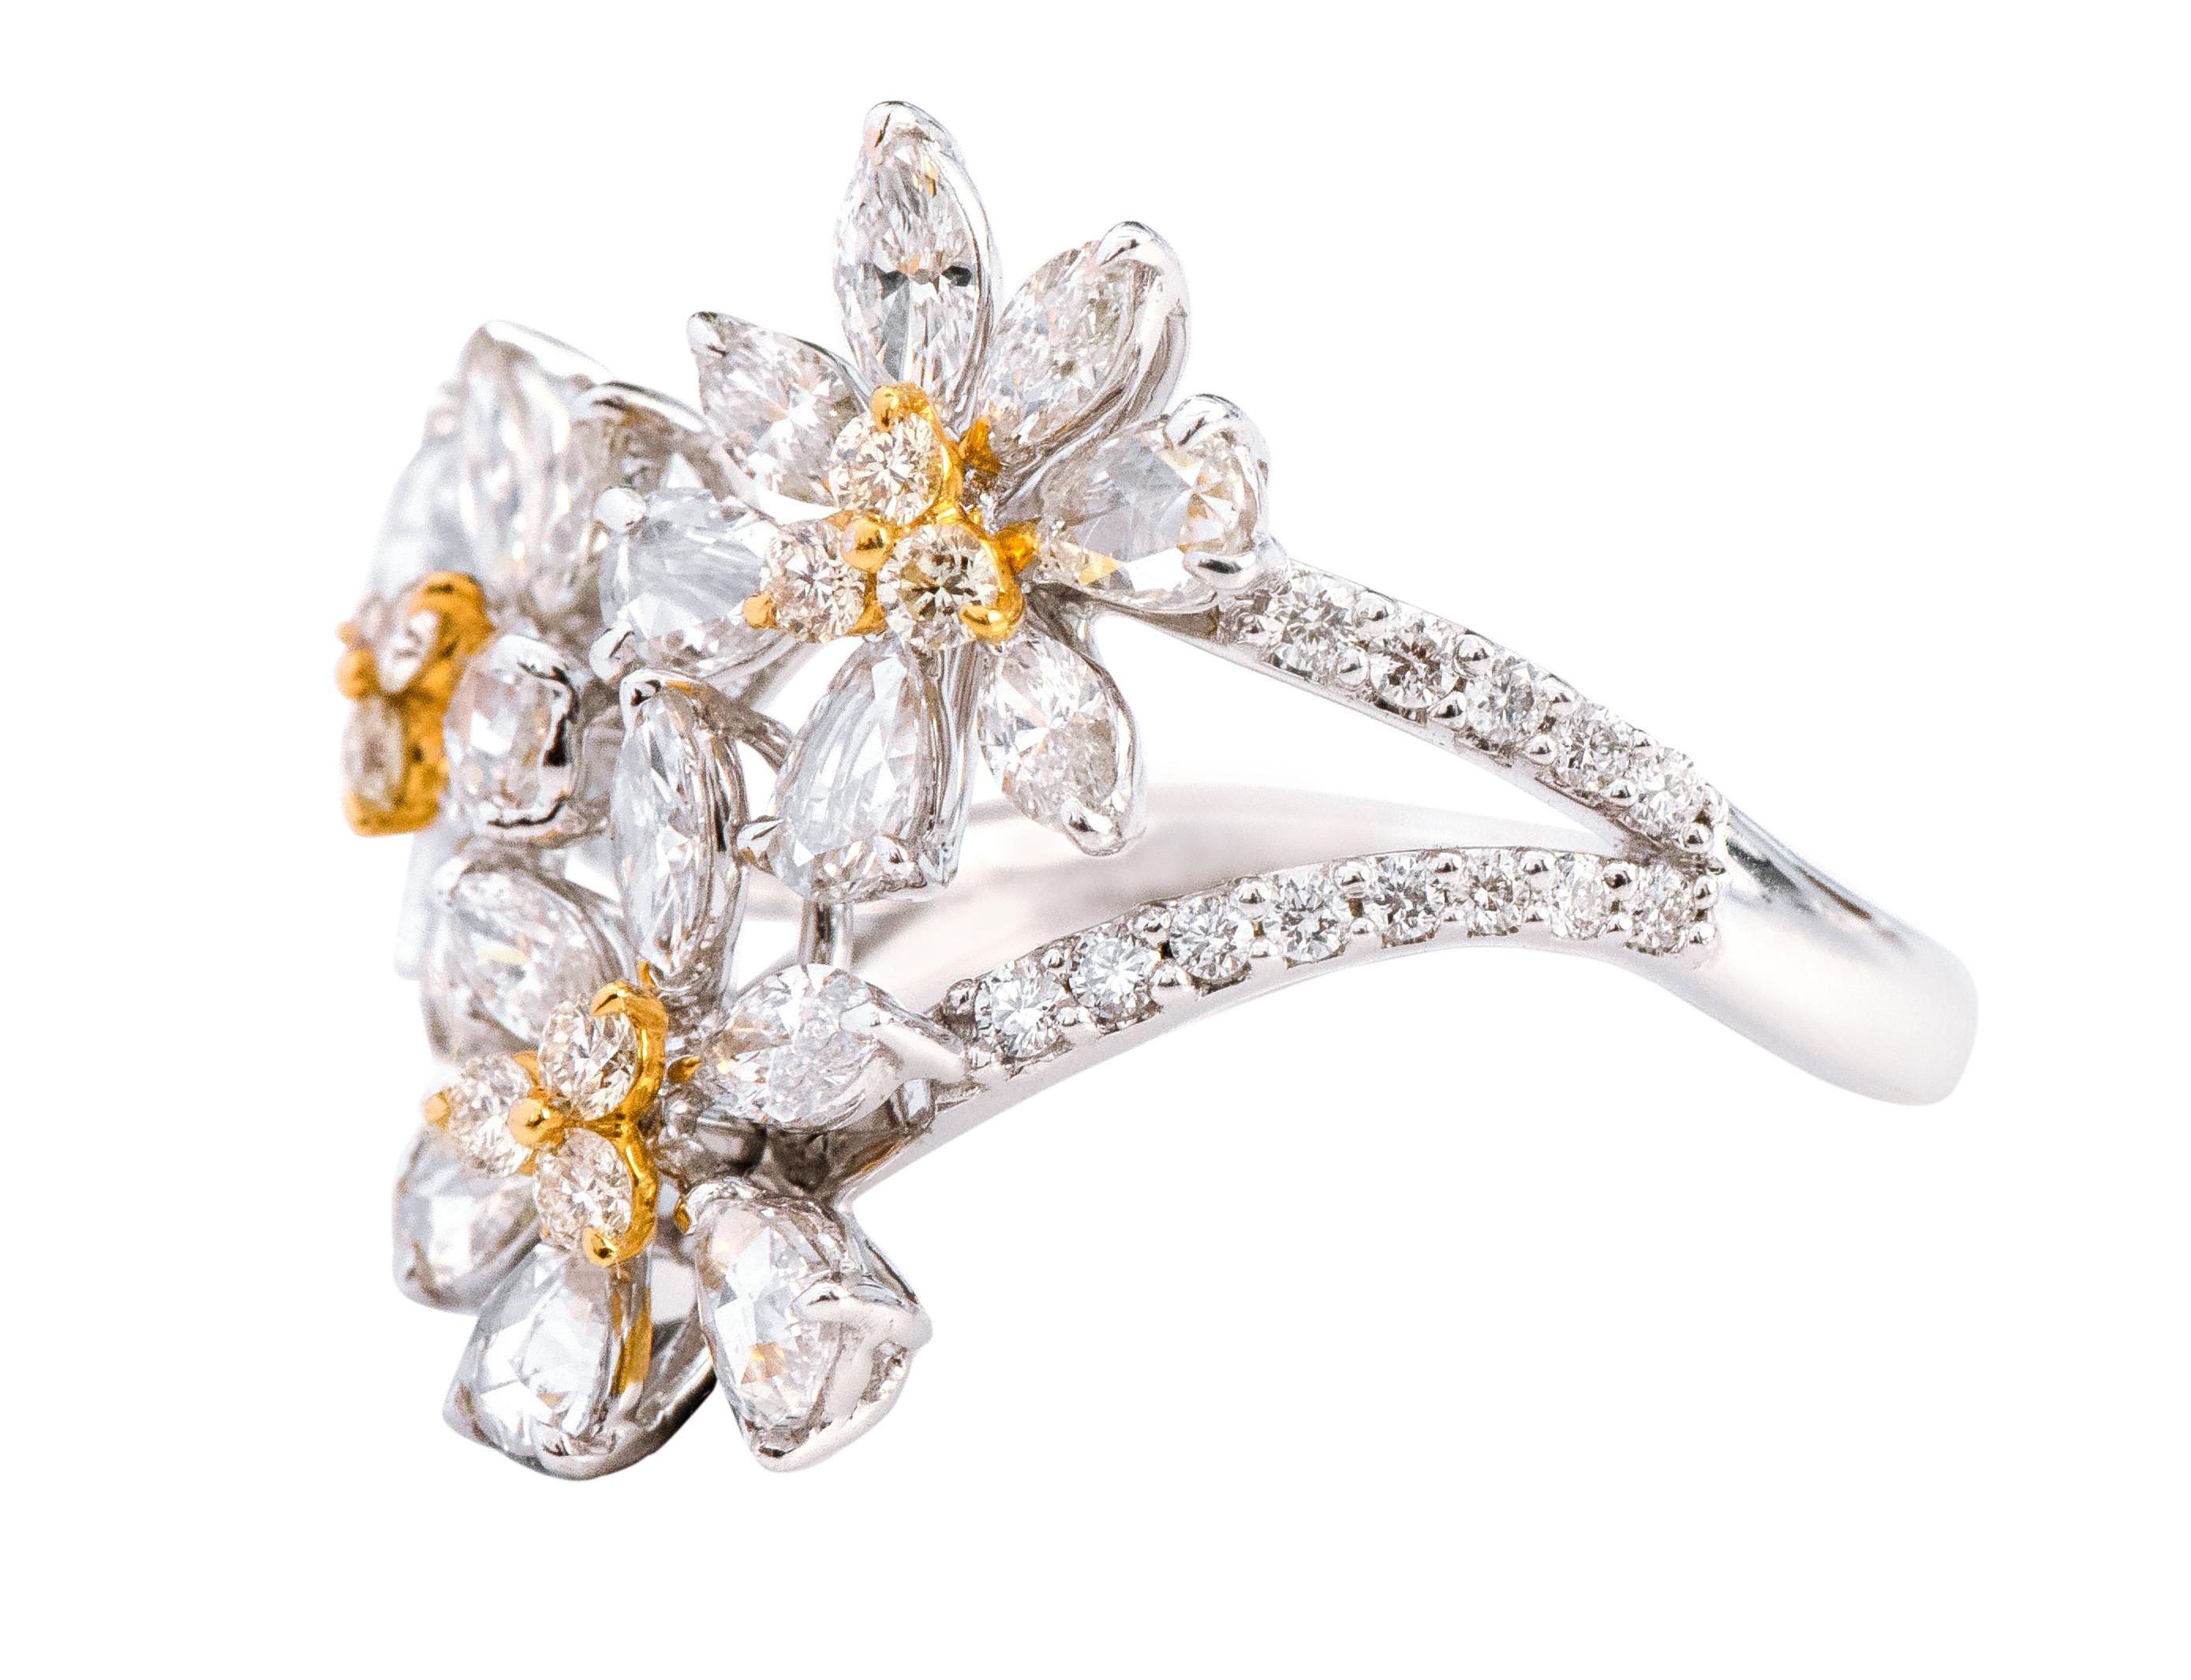 18 Karat White Gold 2.08 Carat Diamond Floral Statement Ring

This exquisite diamond three-flower ring is beyond exemplary. It shows our love for nature and its eminent beauty. The special short and elongated broad rose-cut pear-shaped diamonds with